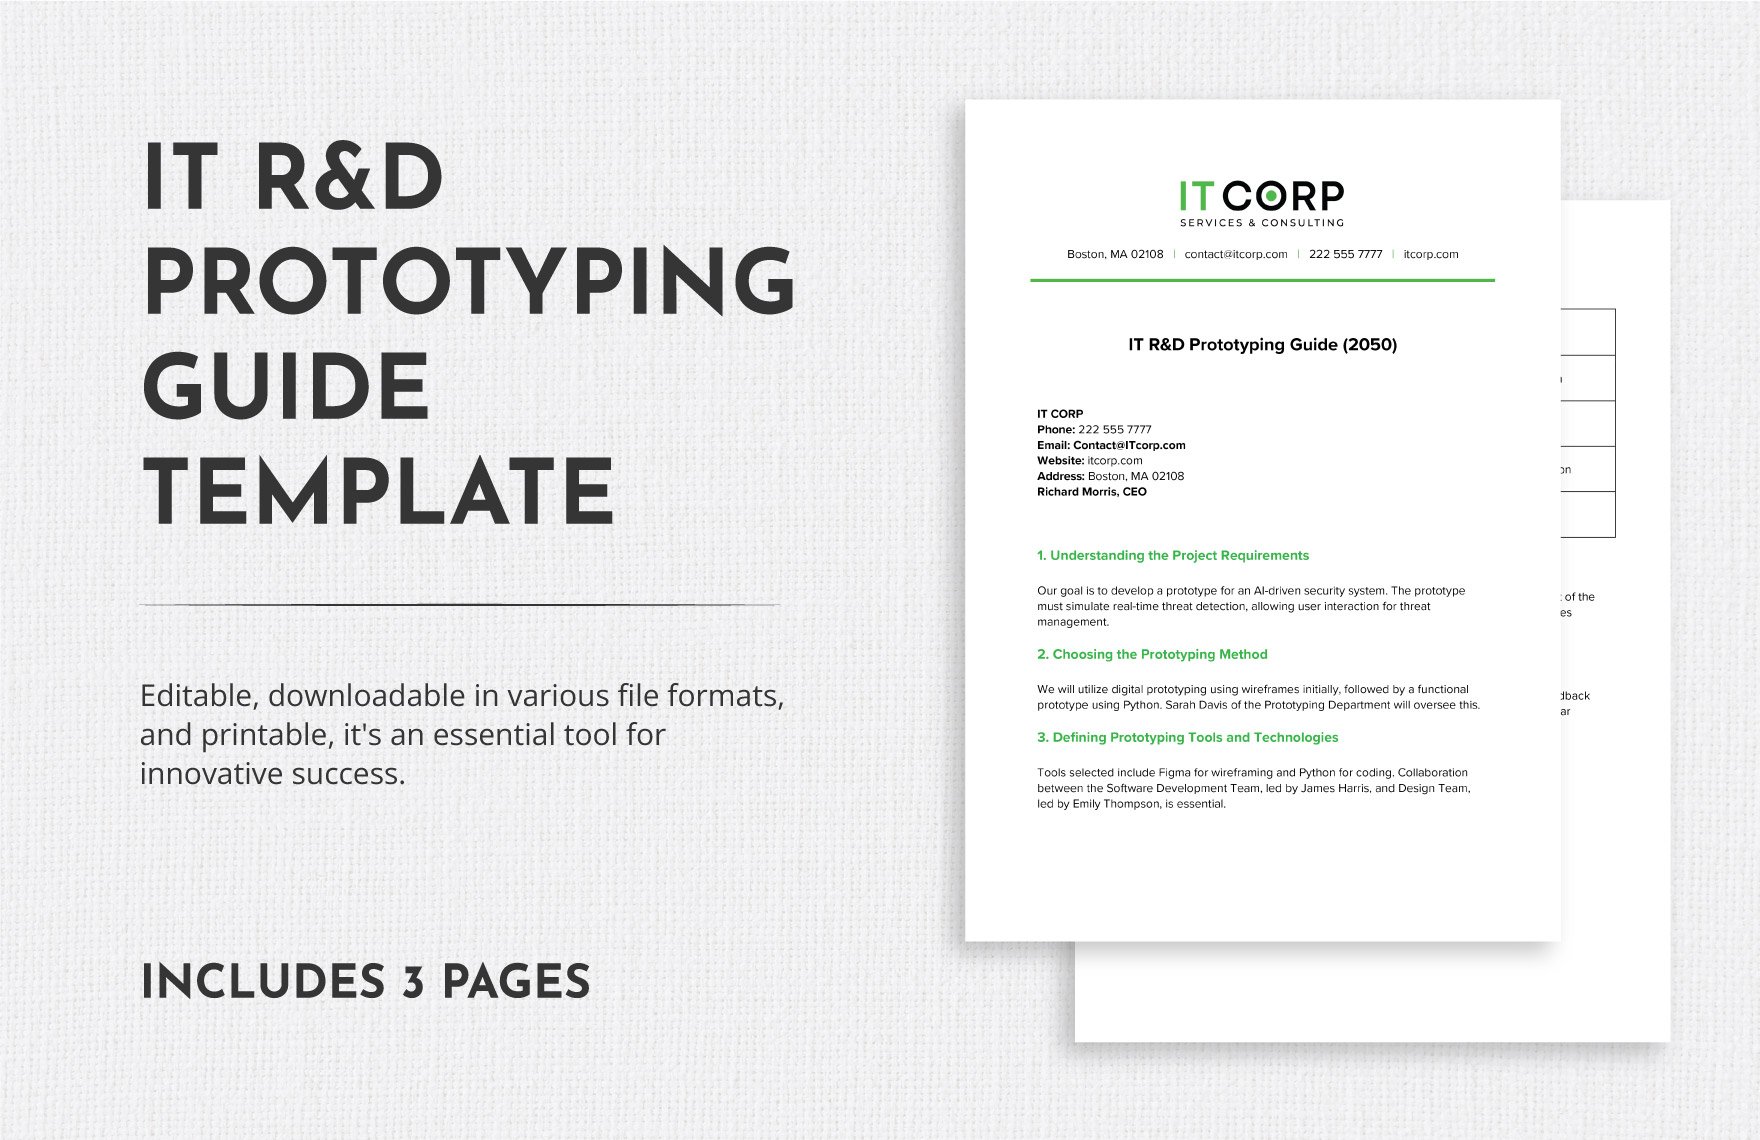 IT R&D Prototyping Guide Template in Word, Google Docs, PDF